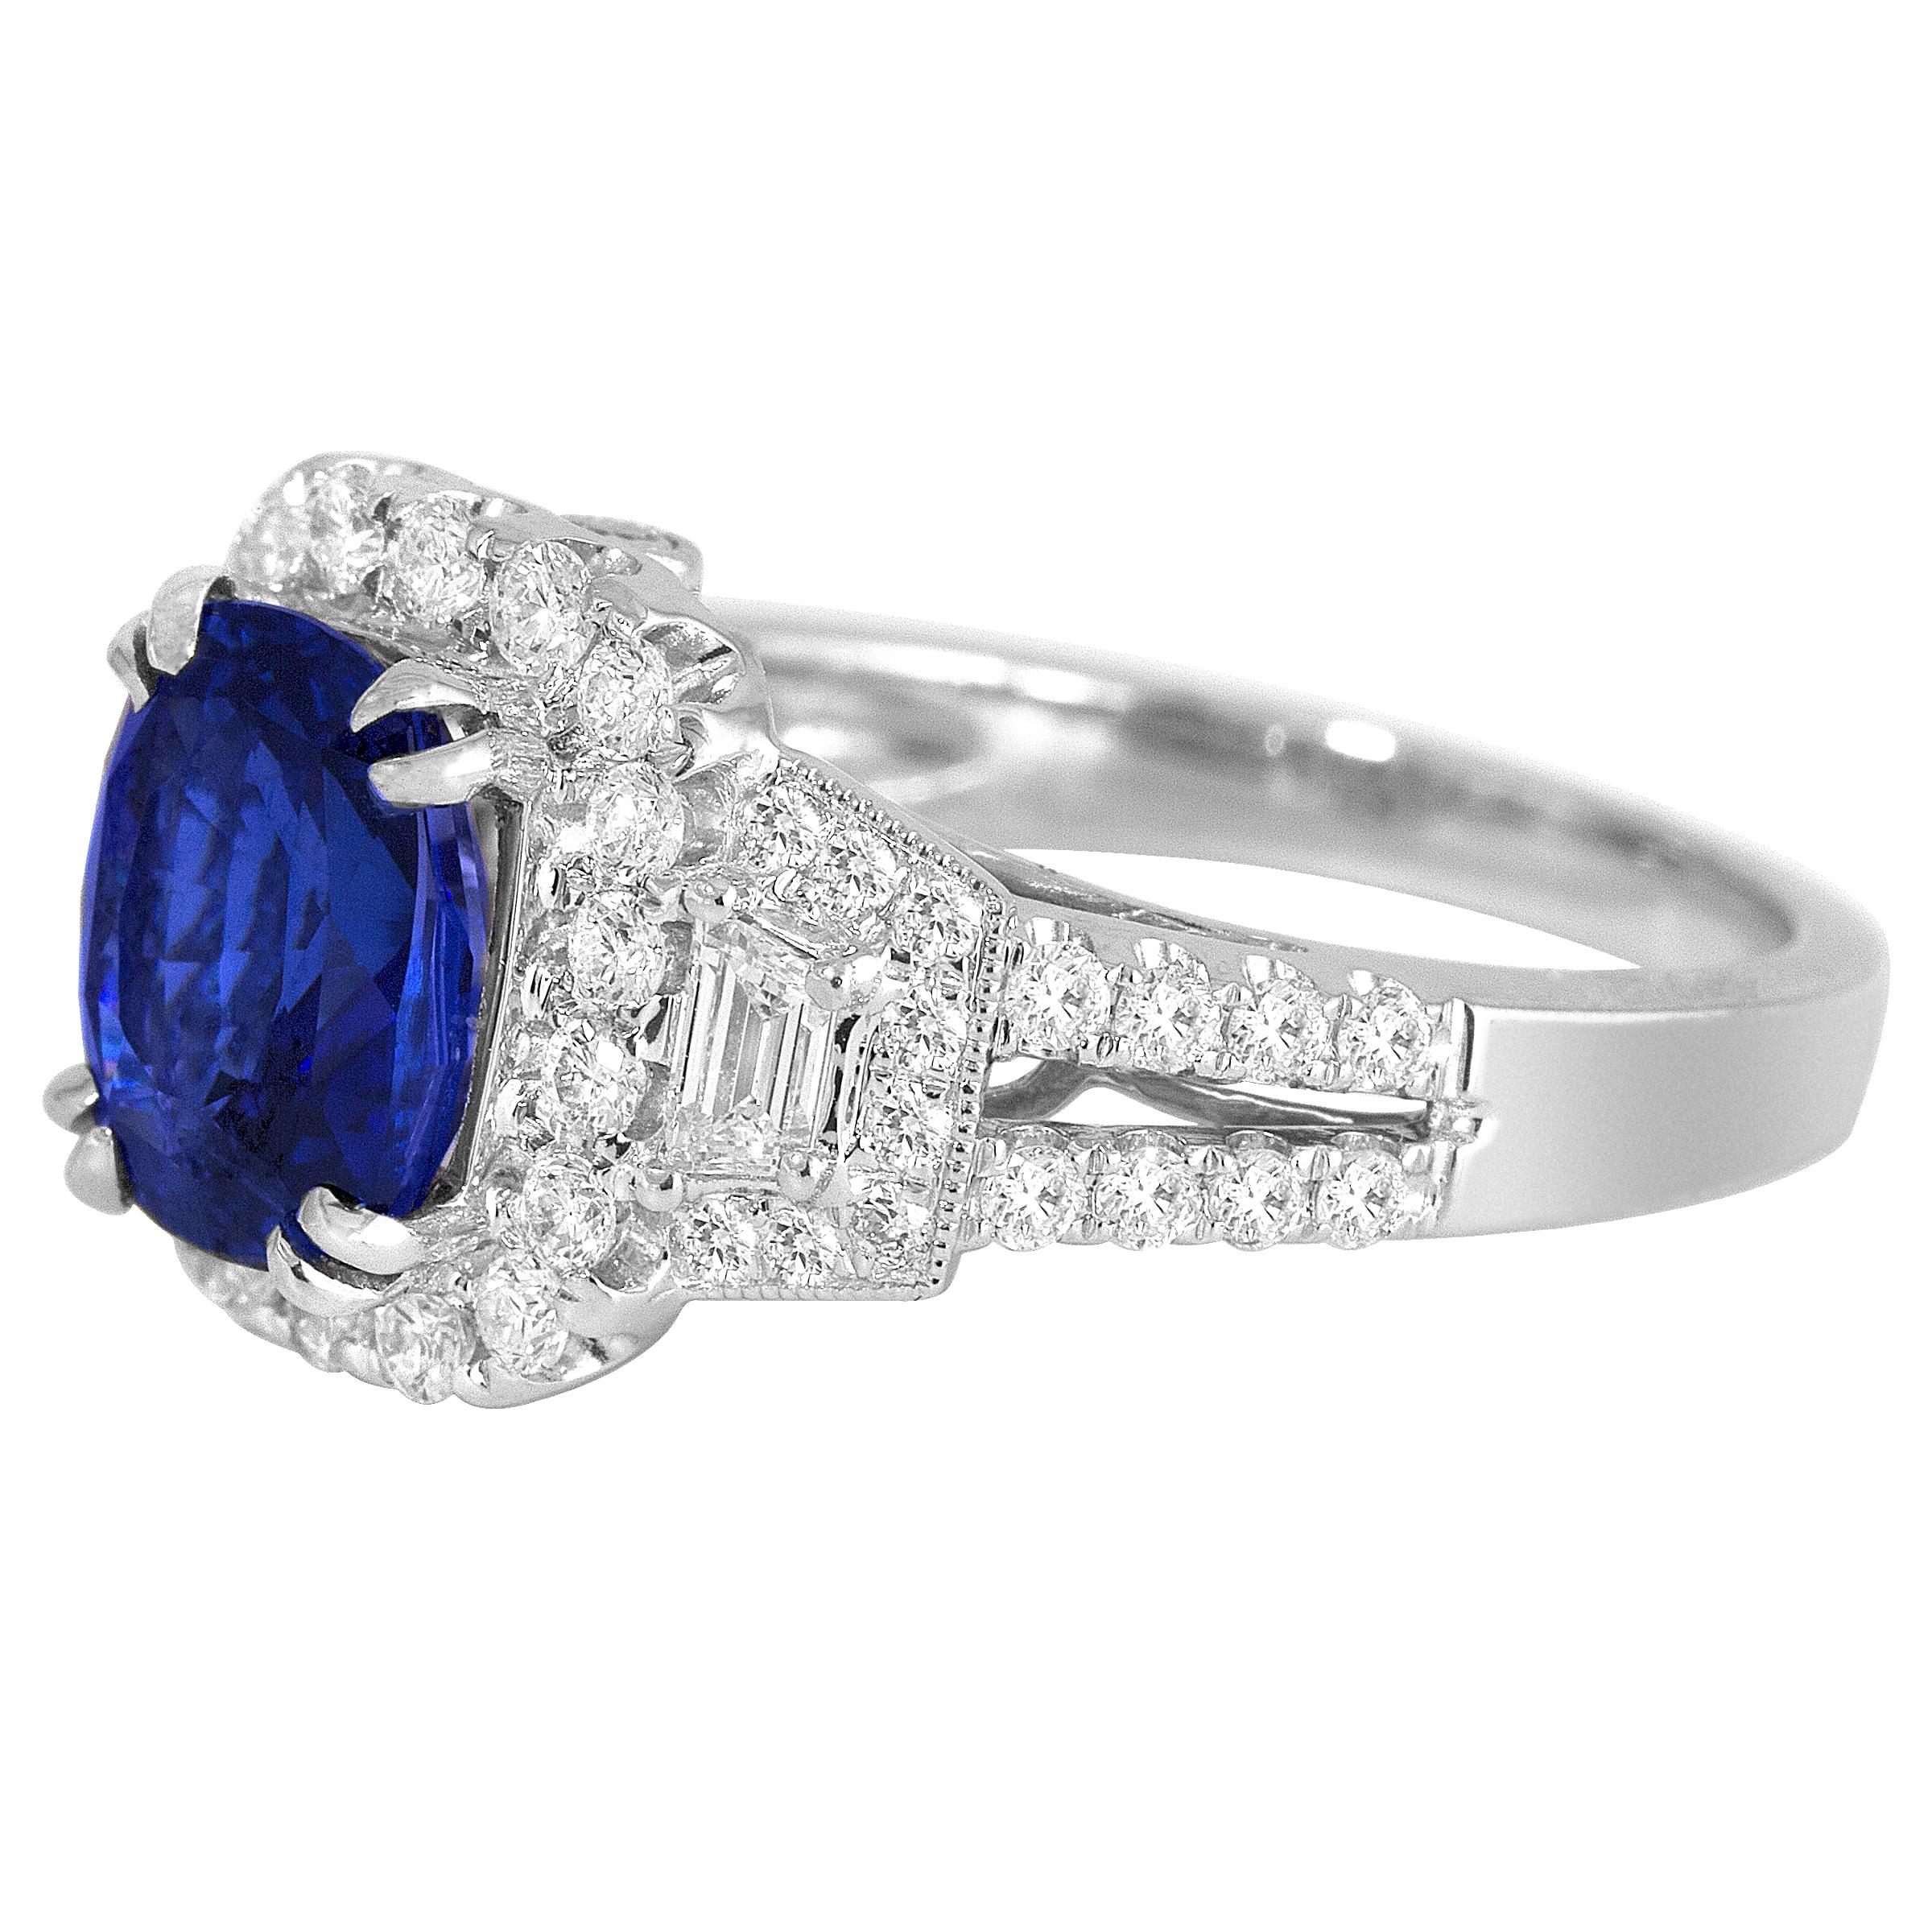 With a GIA Certified 2.56 carat cushion cut Ceylon sapphire center, and 0.87 carats white diamonds, this ring shines from every angle. Intricate hand engraved milgrain work throughout adds to the charm of the piece.

GIA Certification details (see